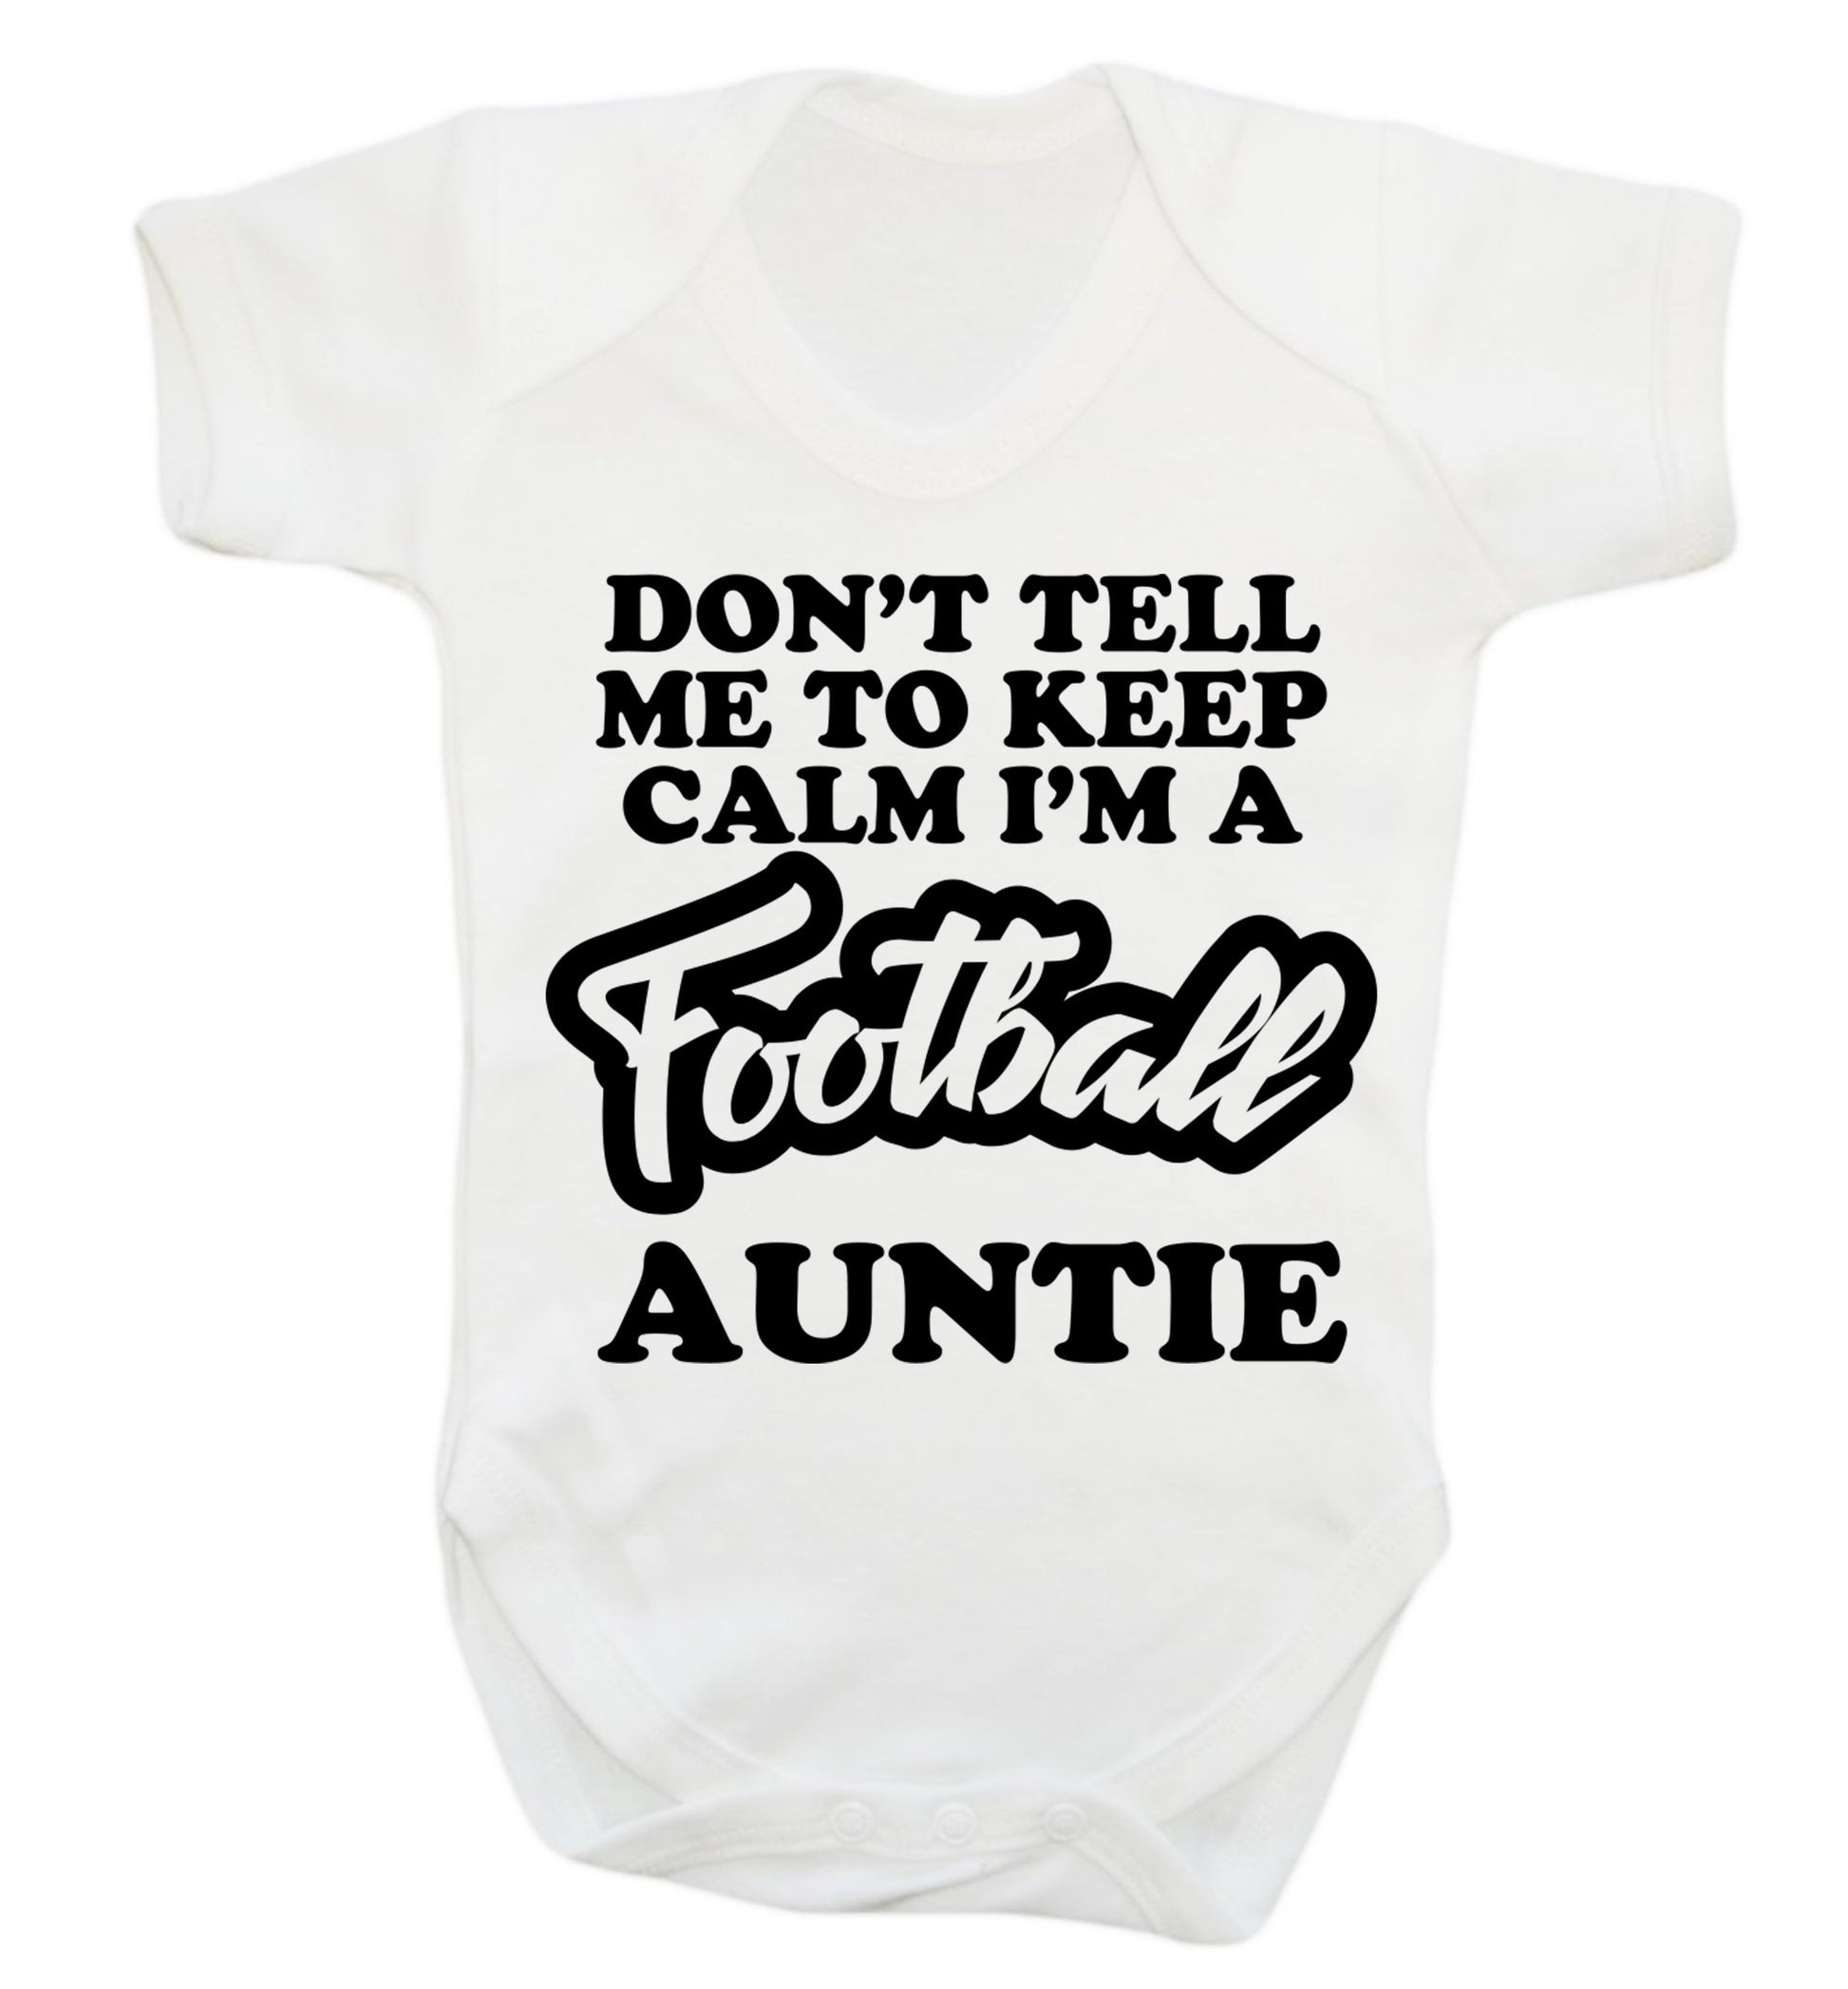 Don't tell me to keep calm I'm a football auntie Baby Vest white 18-24 months